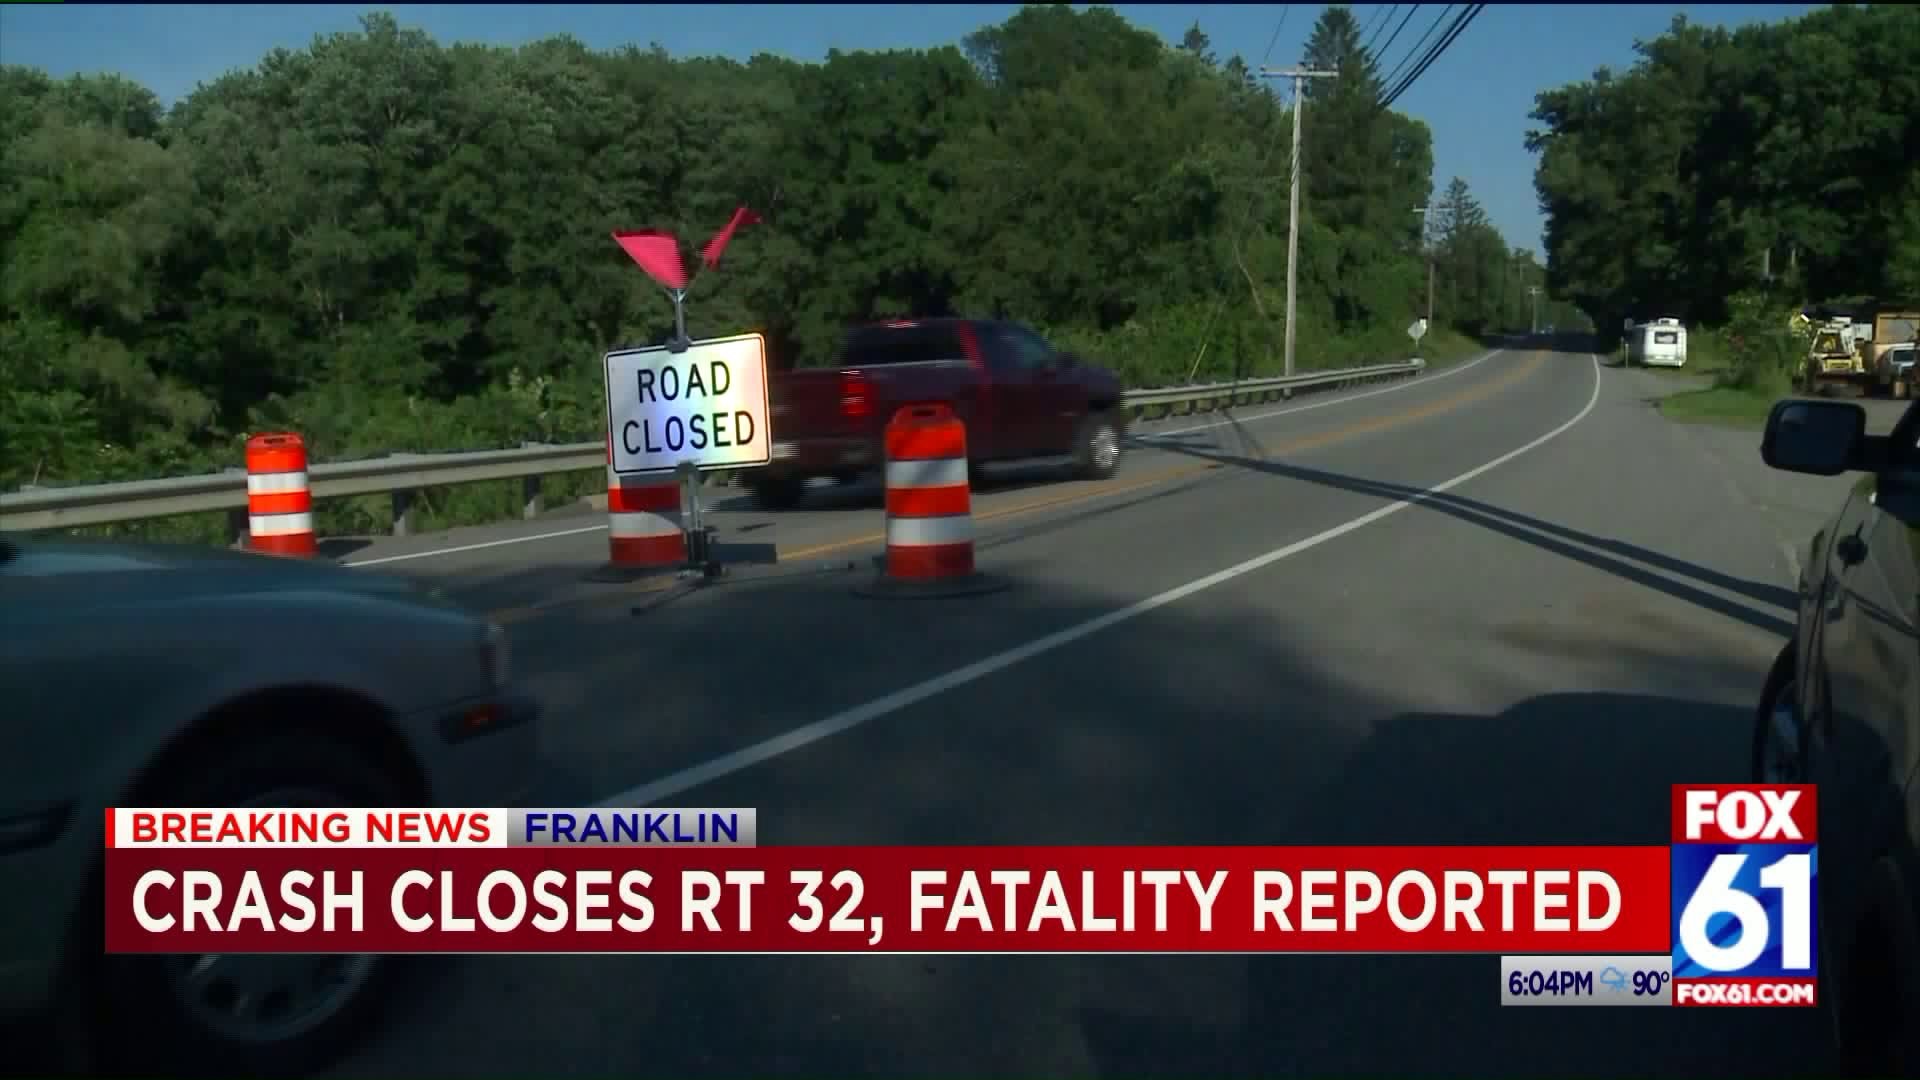 Crash Closes Rt. 32 in Franklin; Fatality Reported